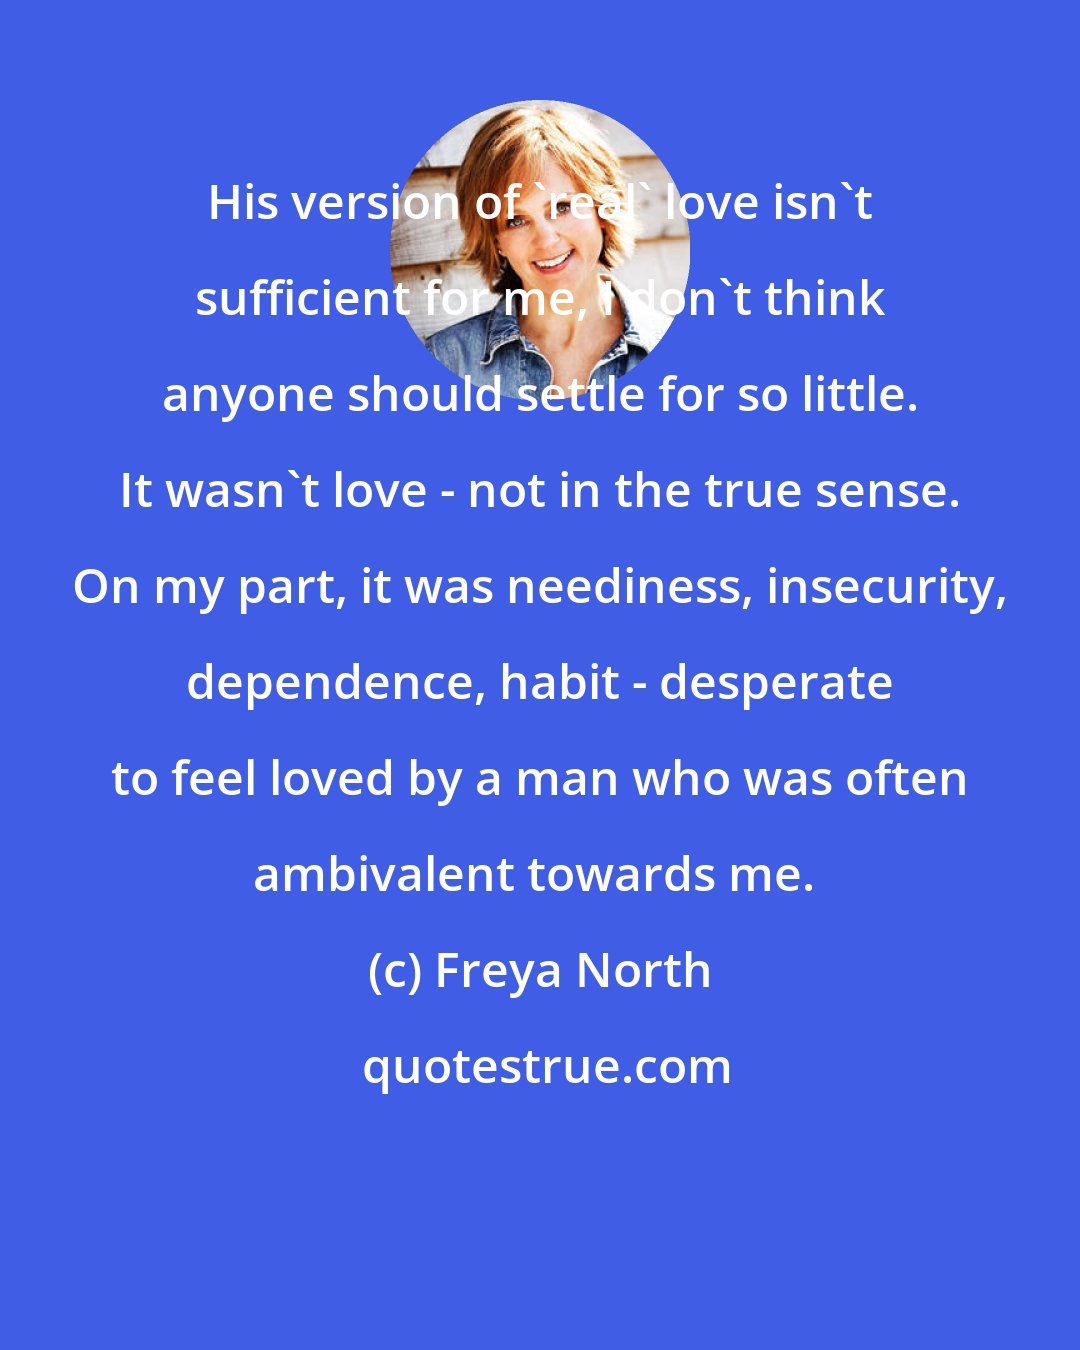 Freya North: His version of 'real' love isn't sufficient for me, I don't think anyone should settle for so little. It wasn't love - not in the true sense. On my part, it was neediness, insecurity, dependence, habit - desperate to feel loved by a man who was often ambivalent towards me. 